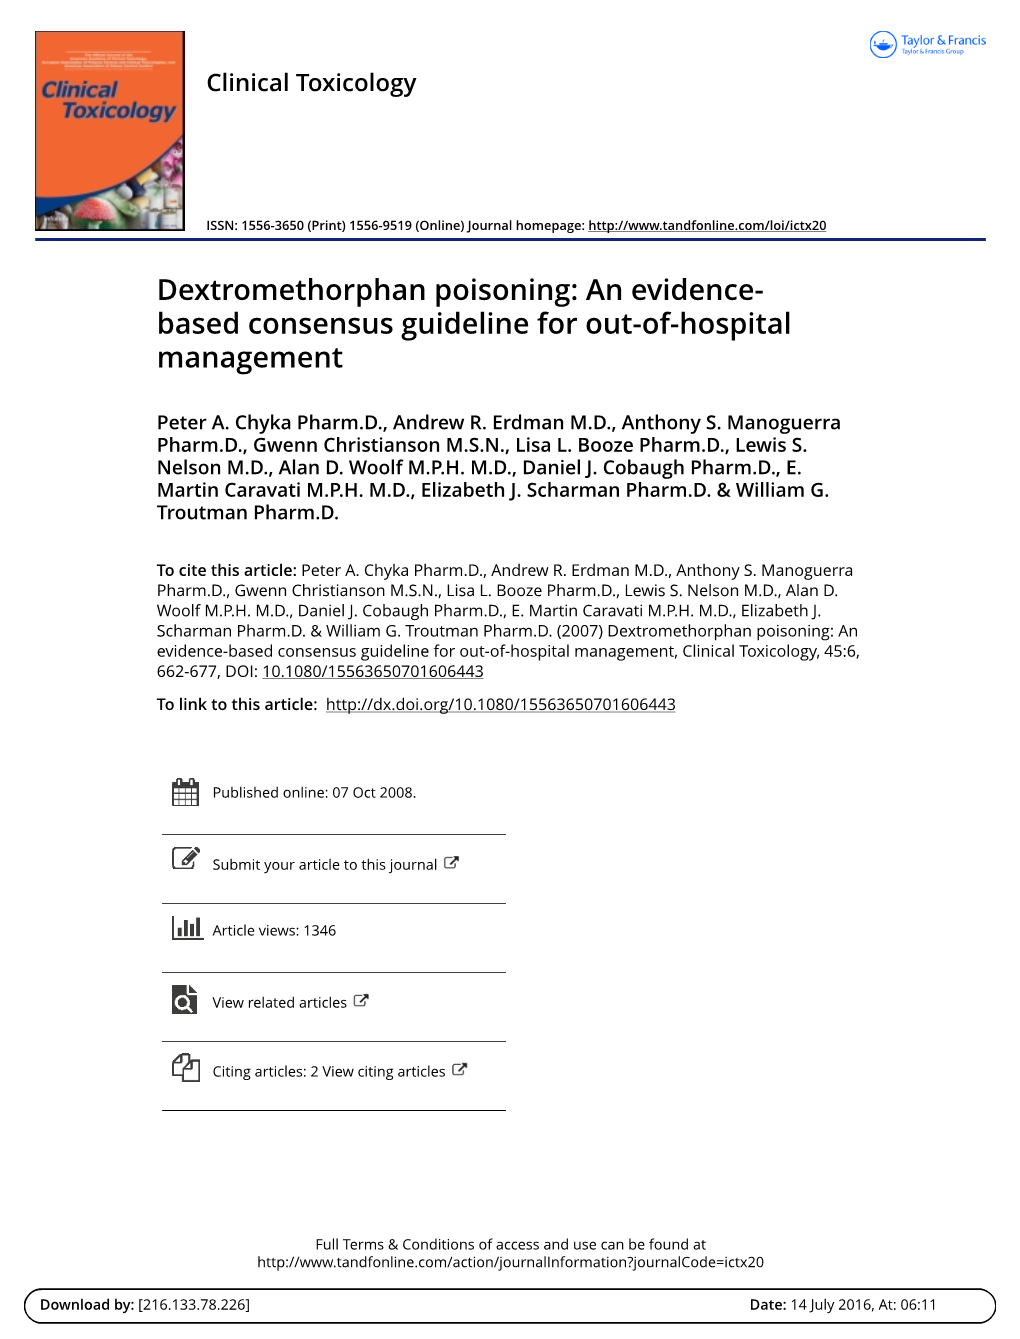 Dextromethorphan Poisoning: an Evidence- Based Consensus Guideline for Out-Of-Hospital Management